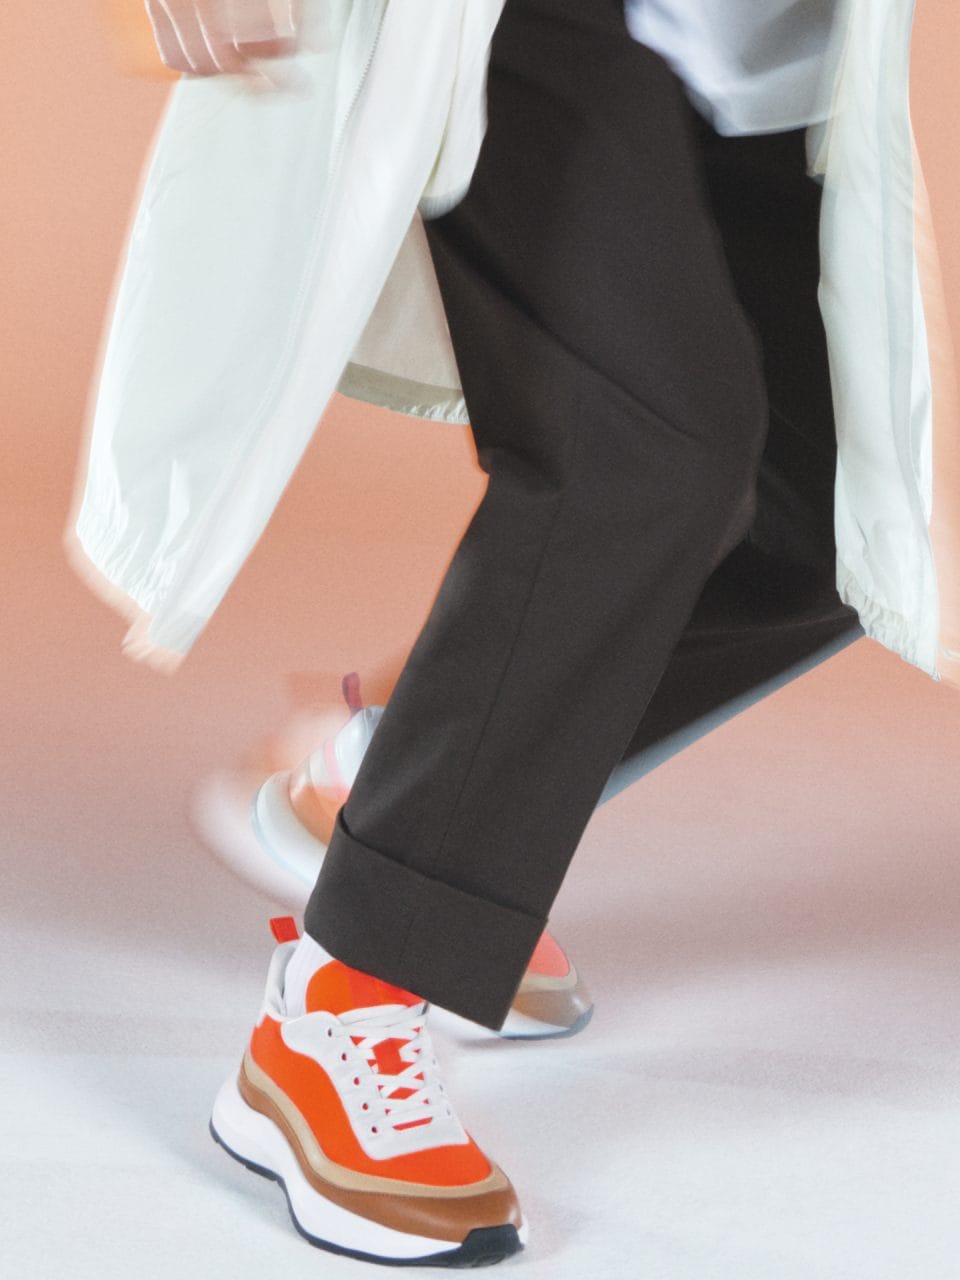 Hermès Spring/Summer 23 Collection Has Footwear for Every Occasion